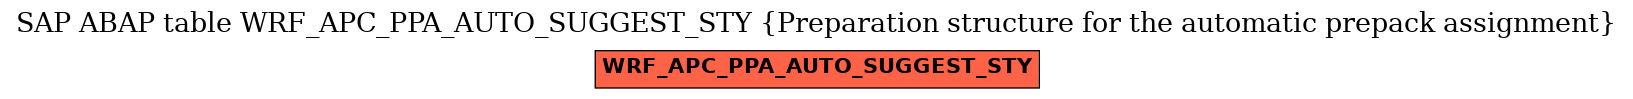 E-R Diagram for table WRF_APC_PPA_AUTO_SUGGEST_STY (Preparation structure for the automatic prepack assignment)